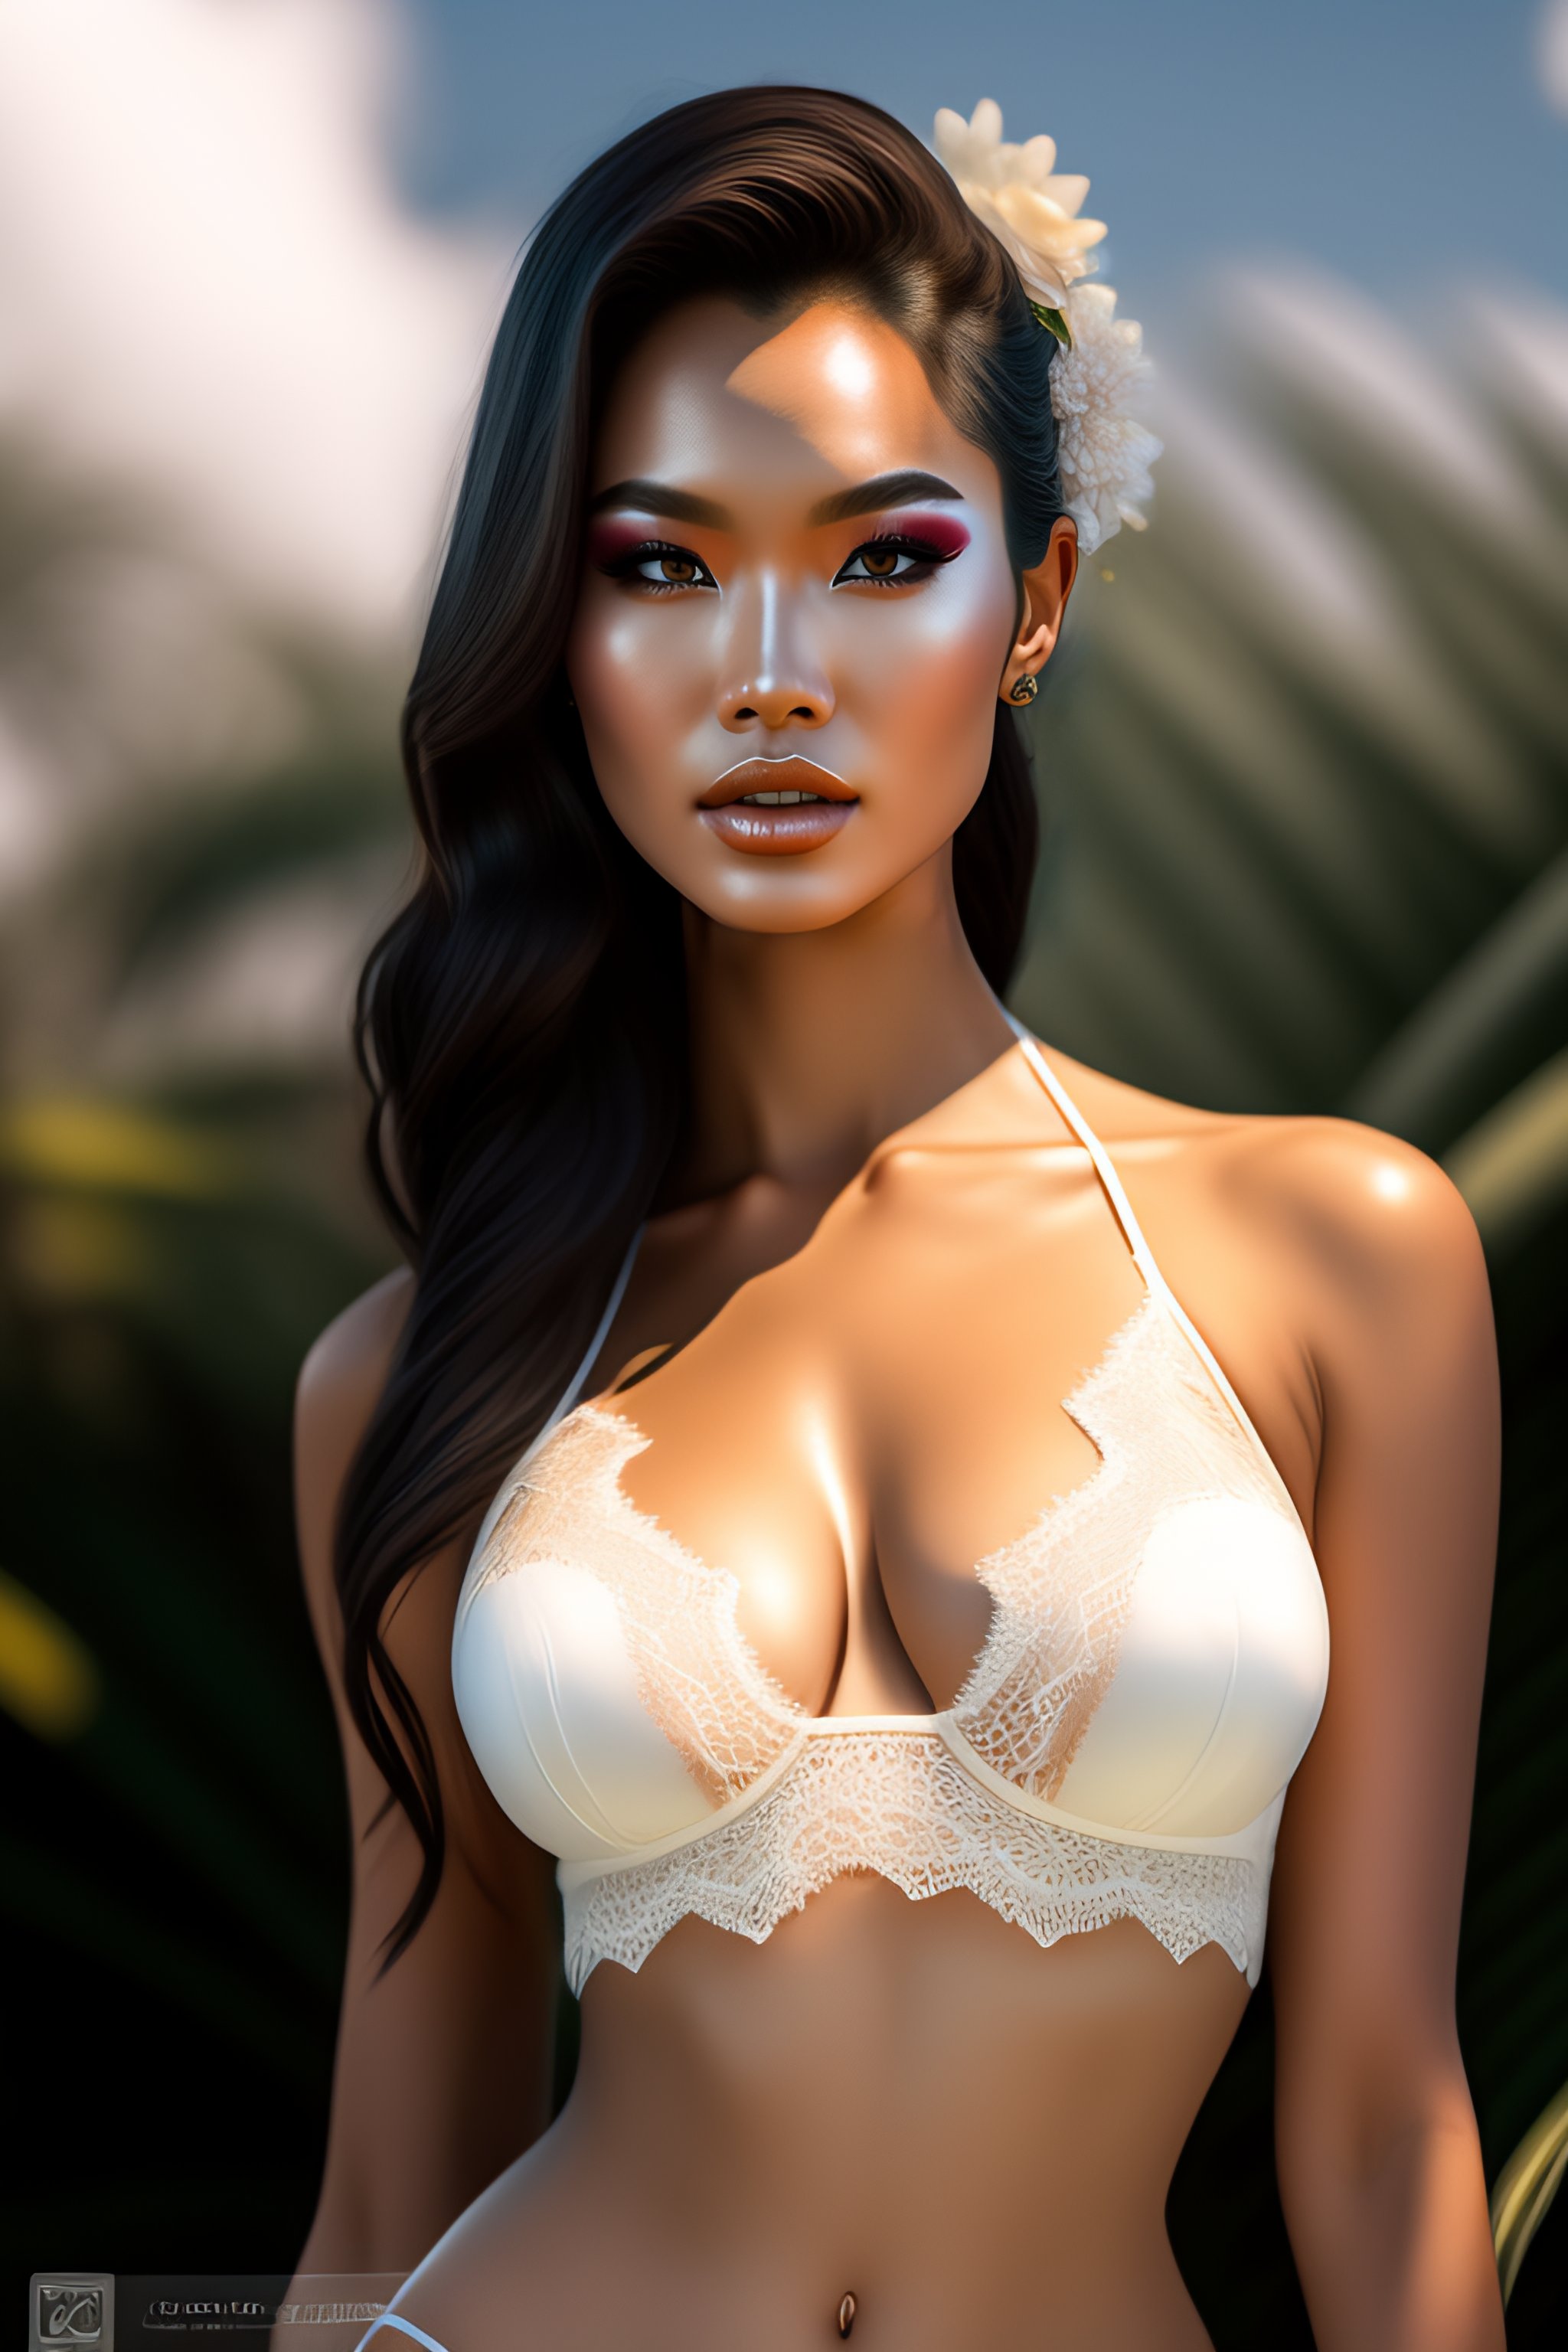 Lexica - Full body, white lace bikini, 34D cup, a gorgeous Balinese model  photo, professionally retouched, muted colors, soft lighting, realistic, sm